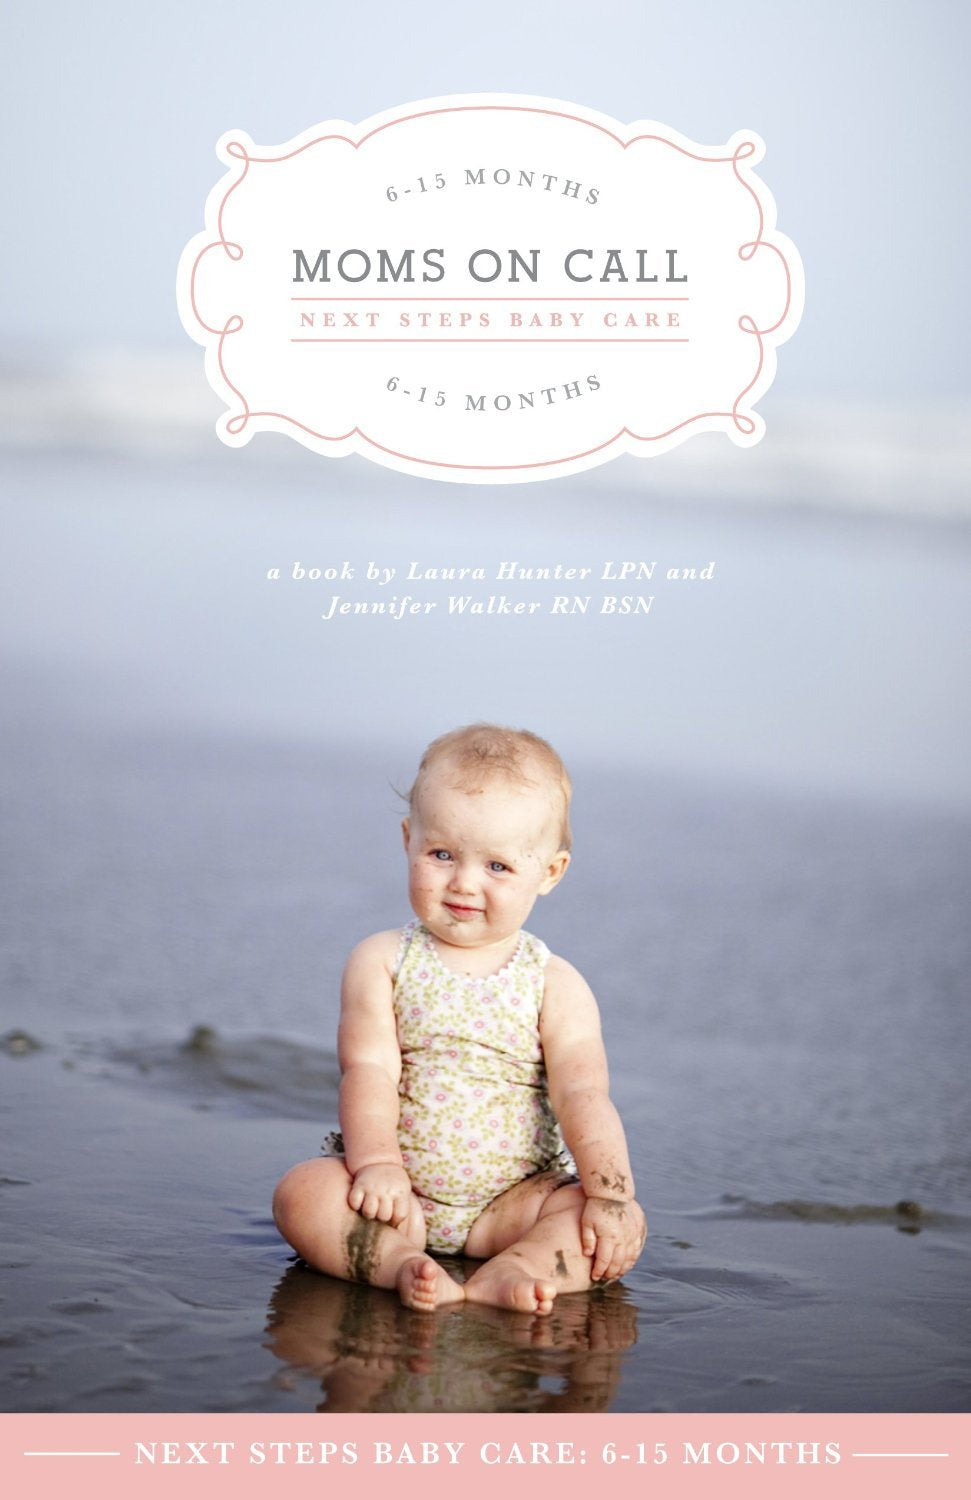 Moms on Call 6 - 15 months